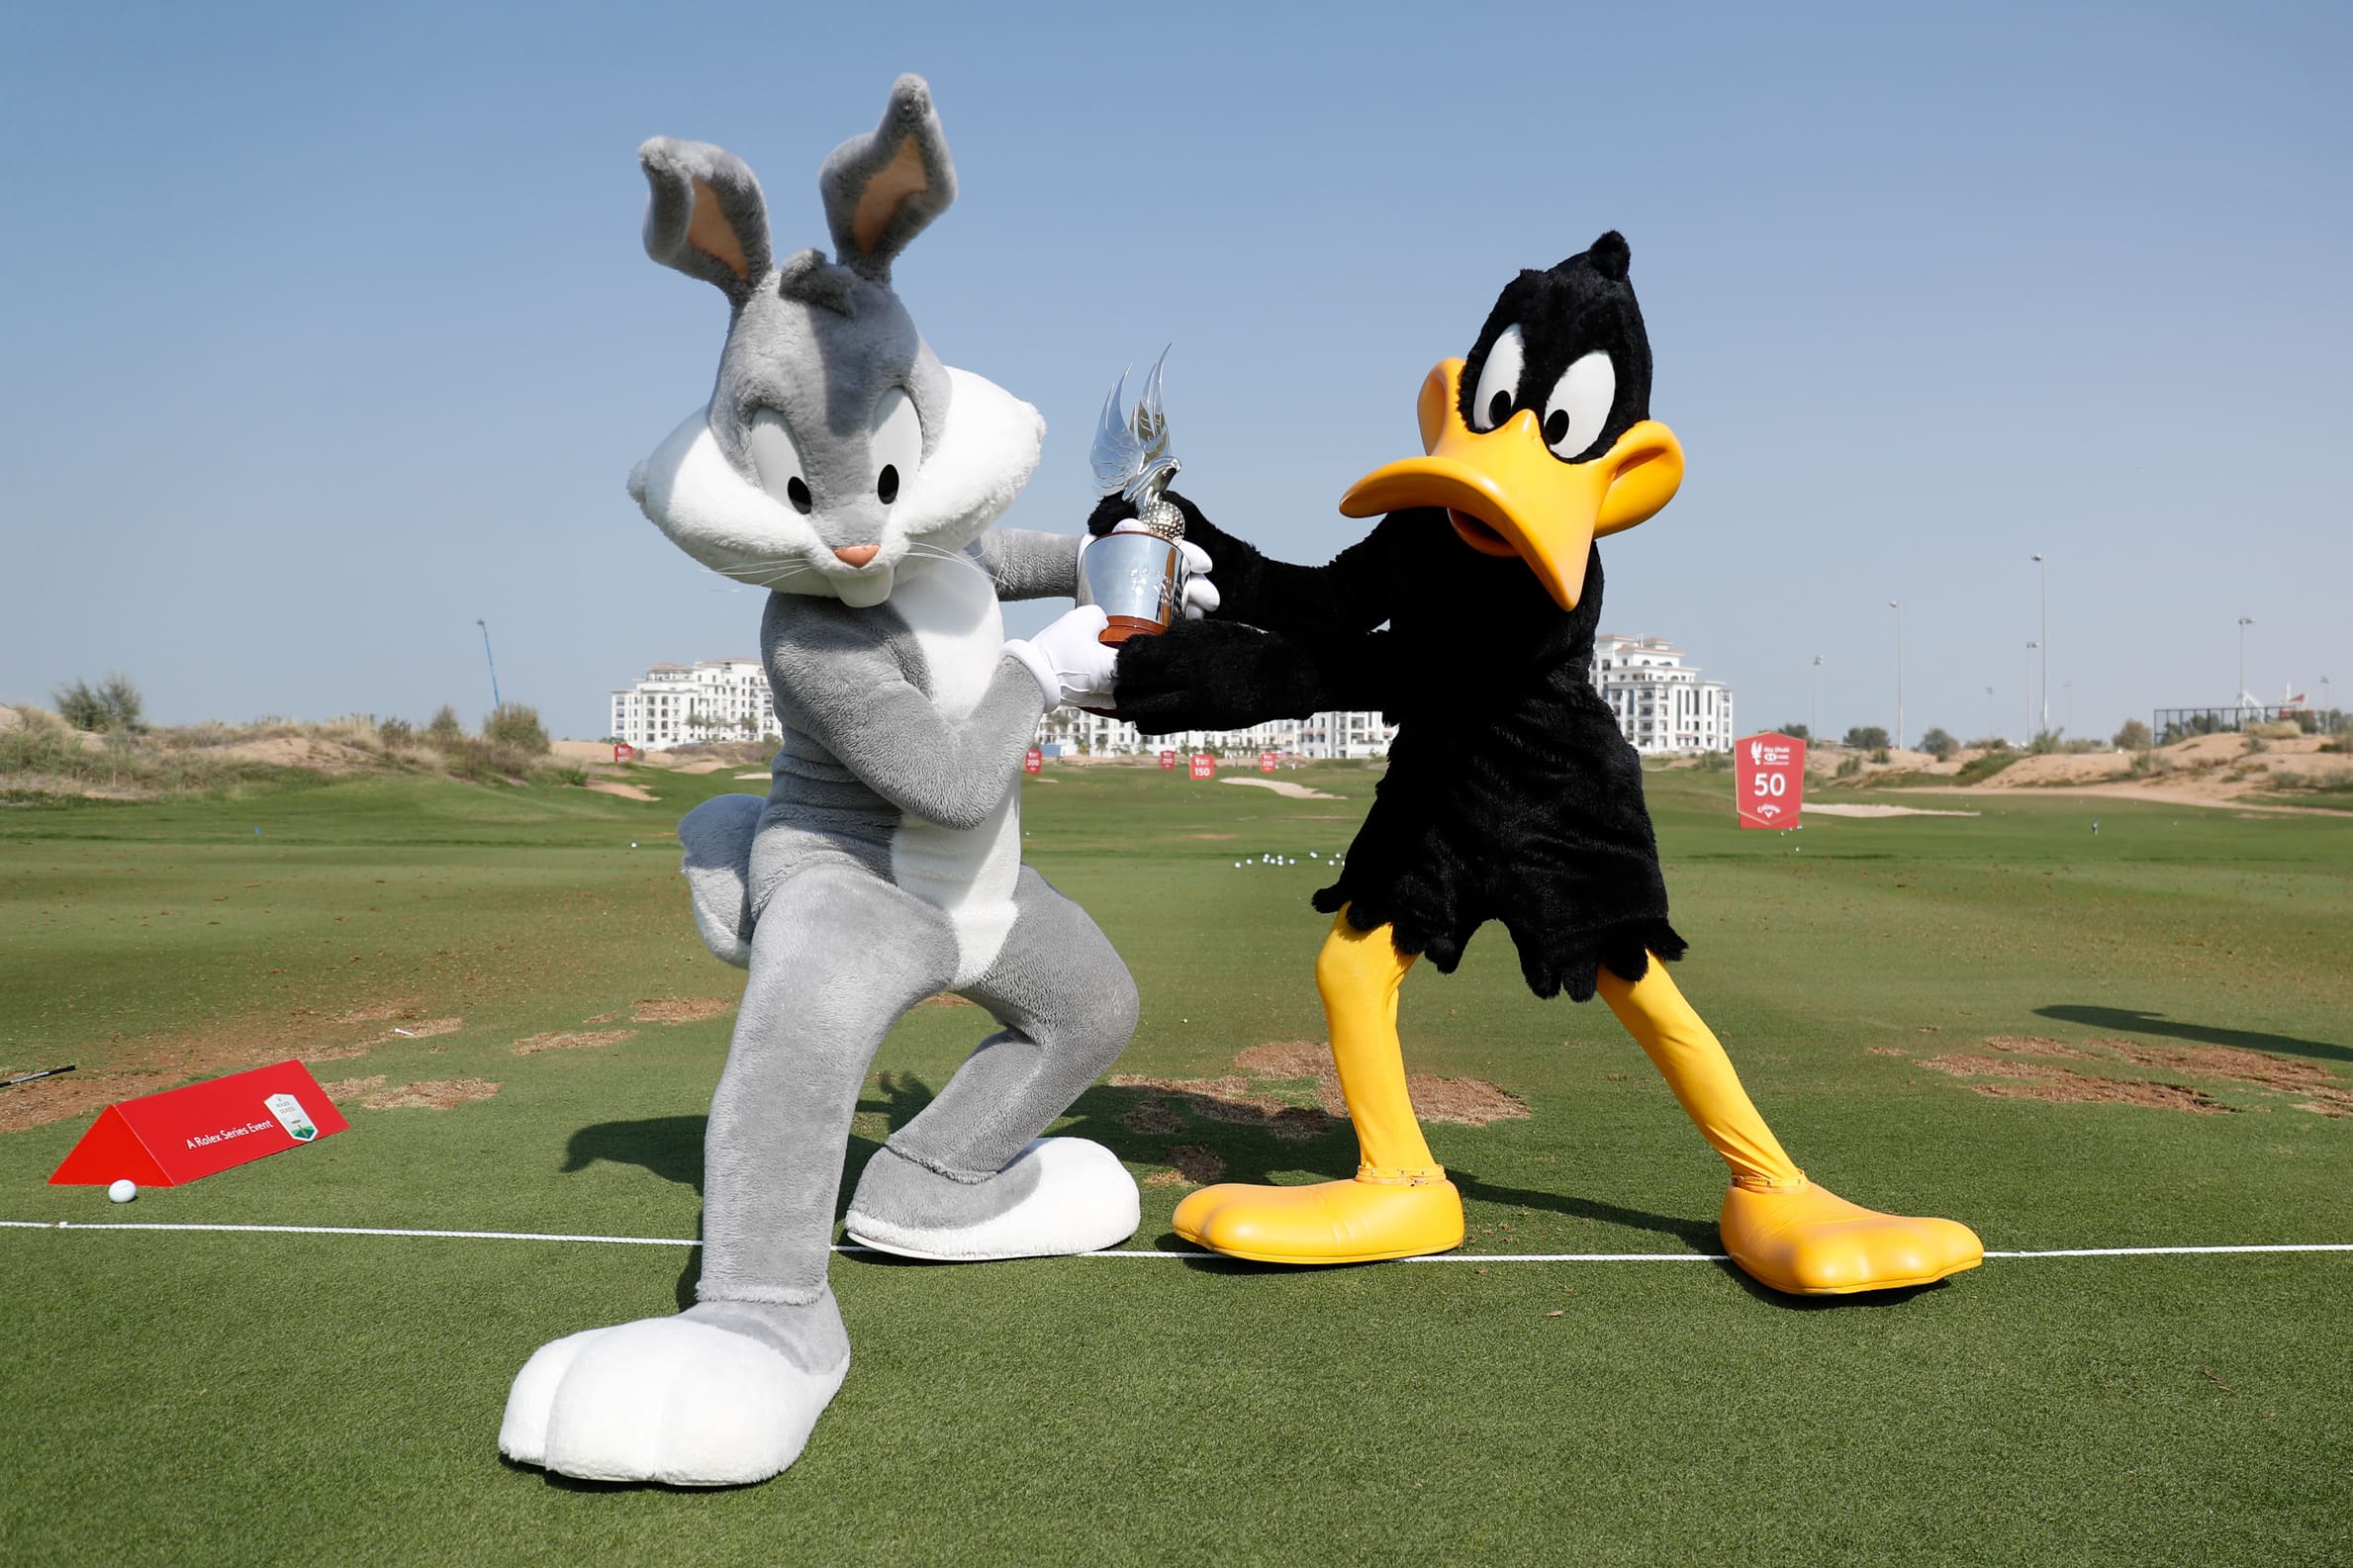 Warner Bros. World™ Abu Dhabi’s Bugs Bunny and Daffy Duck make an exciting appearance